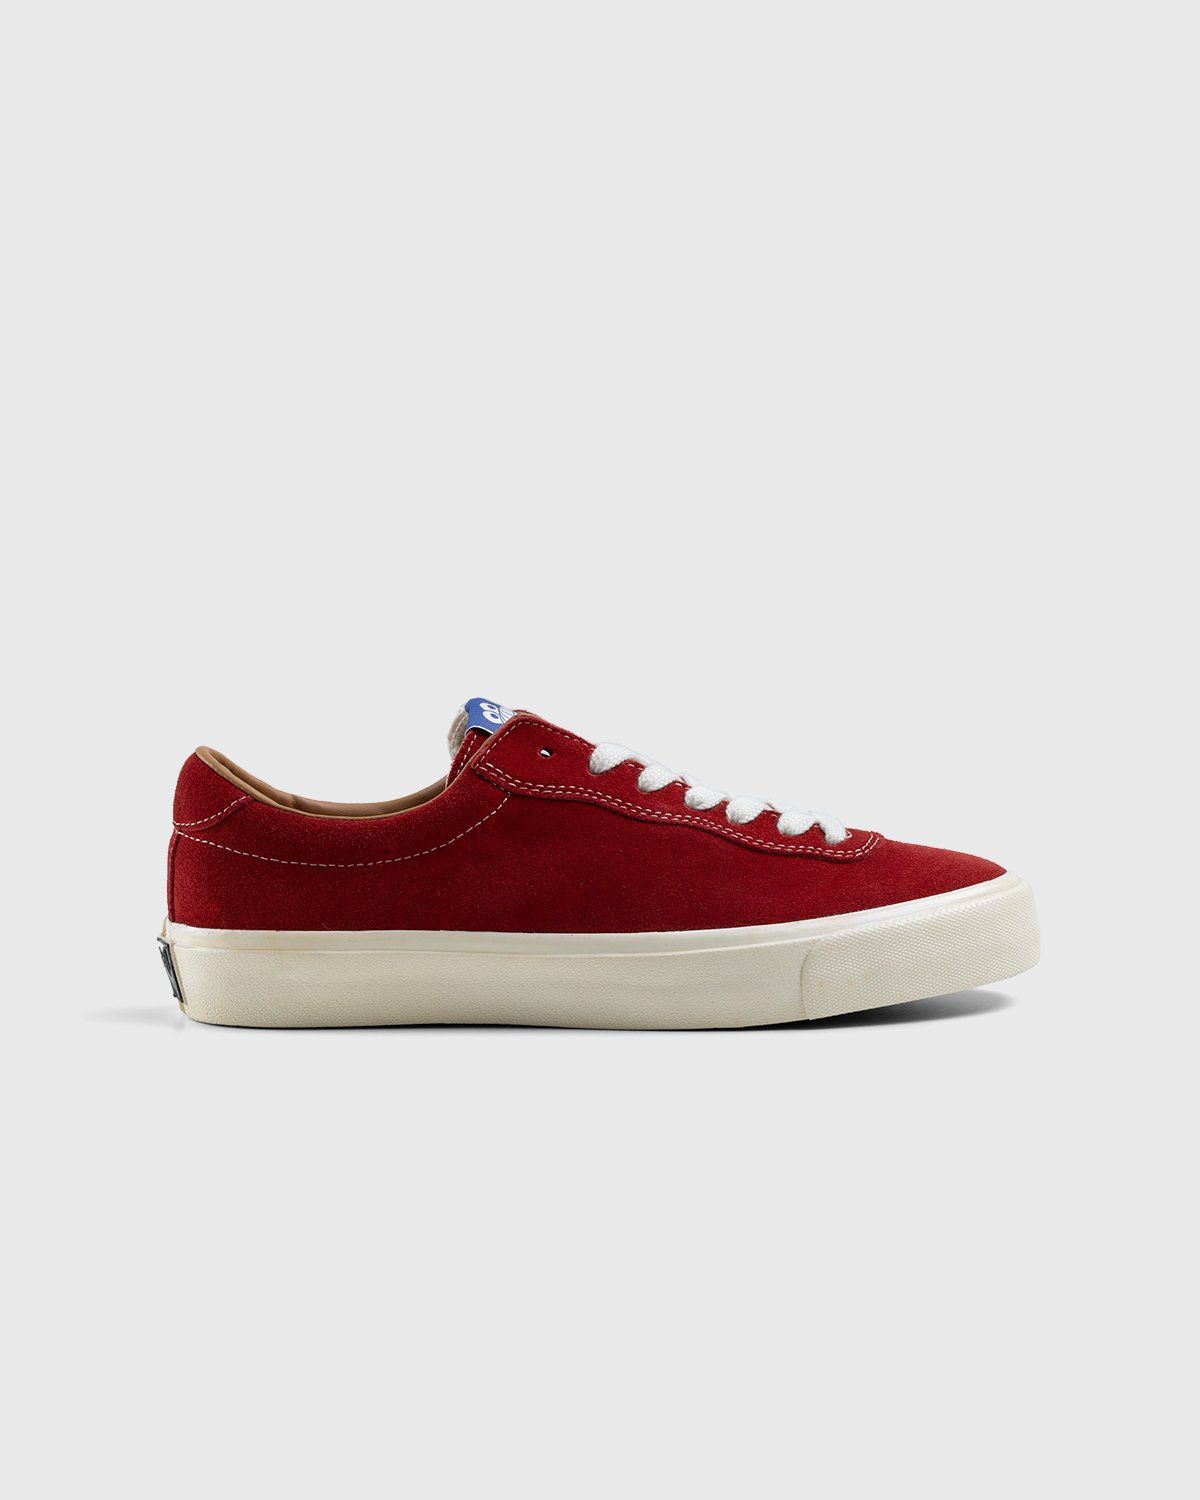 Last Resort AB – VM001 Lo Suede Old Red/White - Sneakers - Red - Image 1